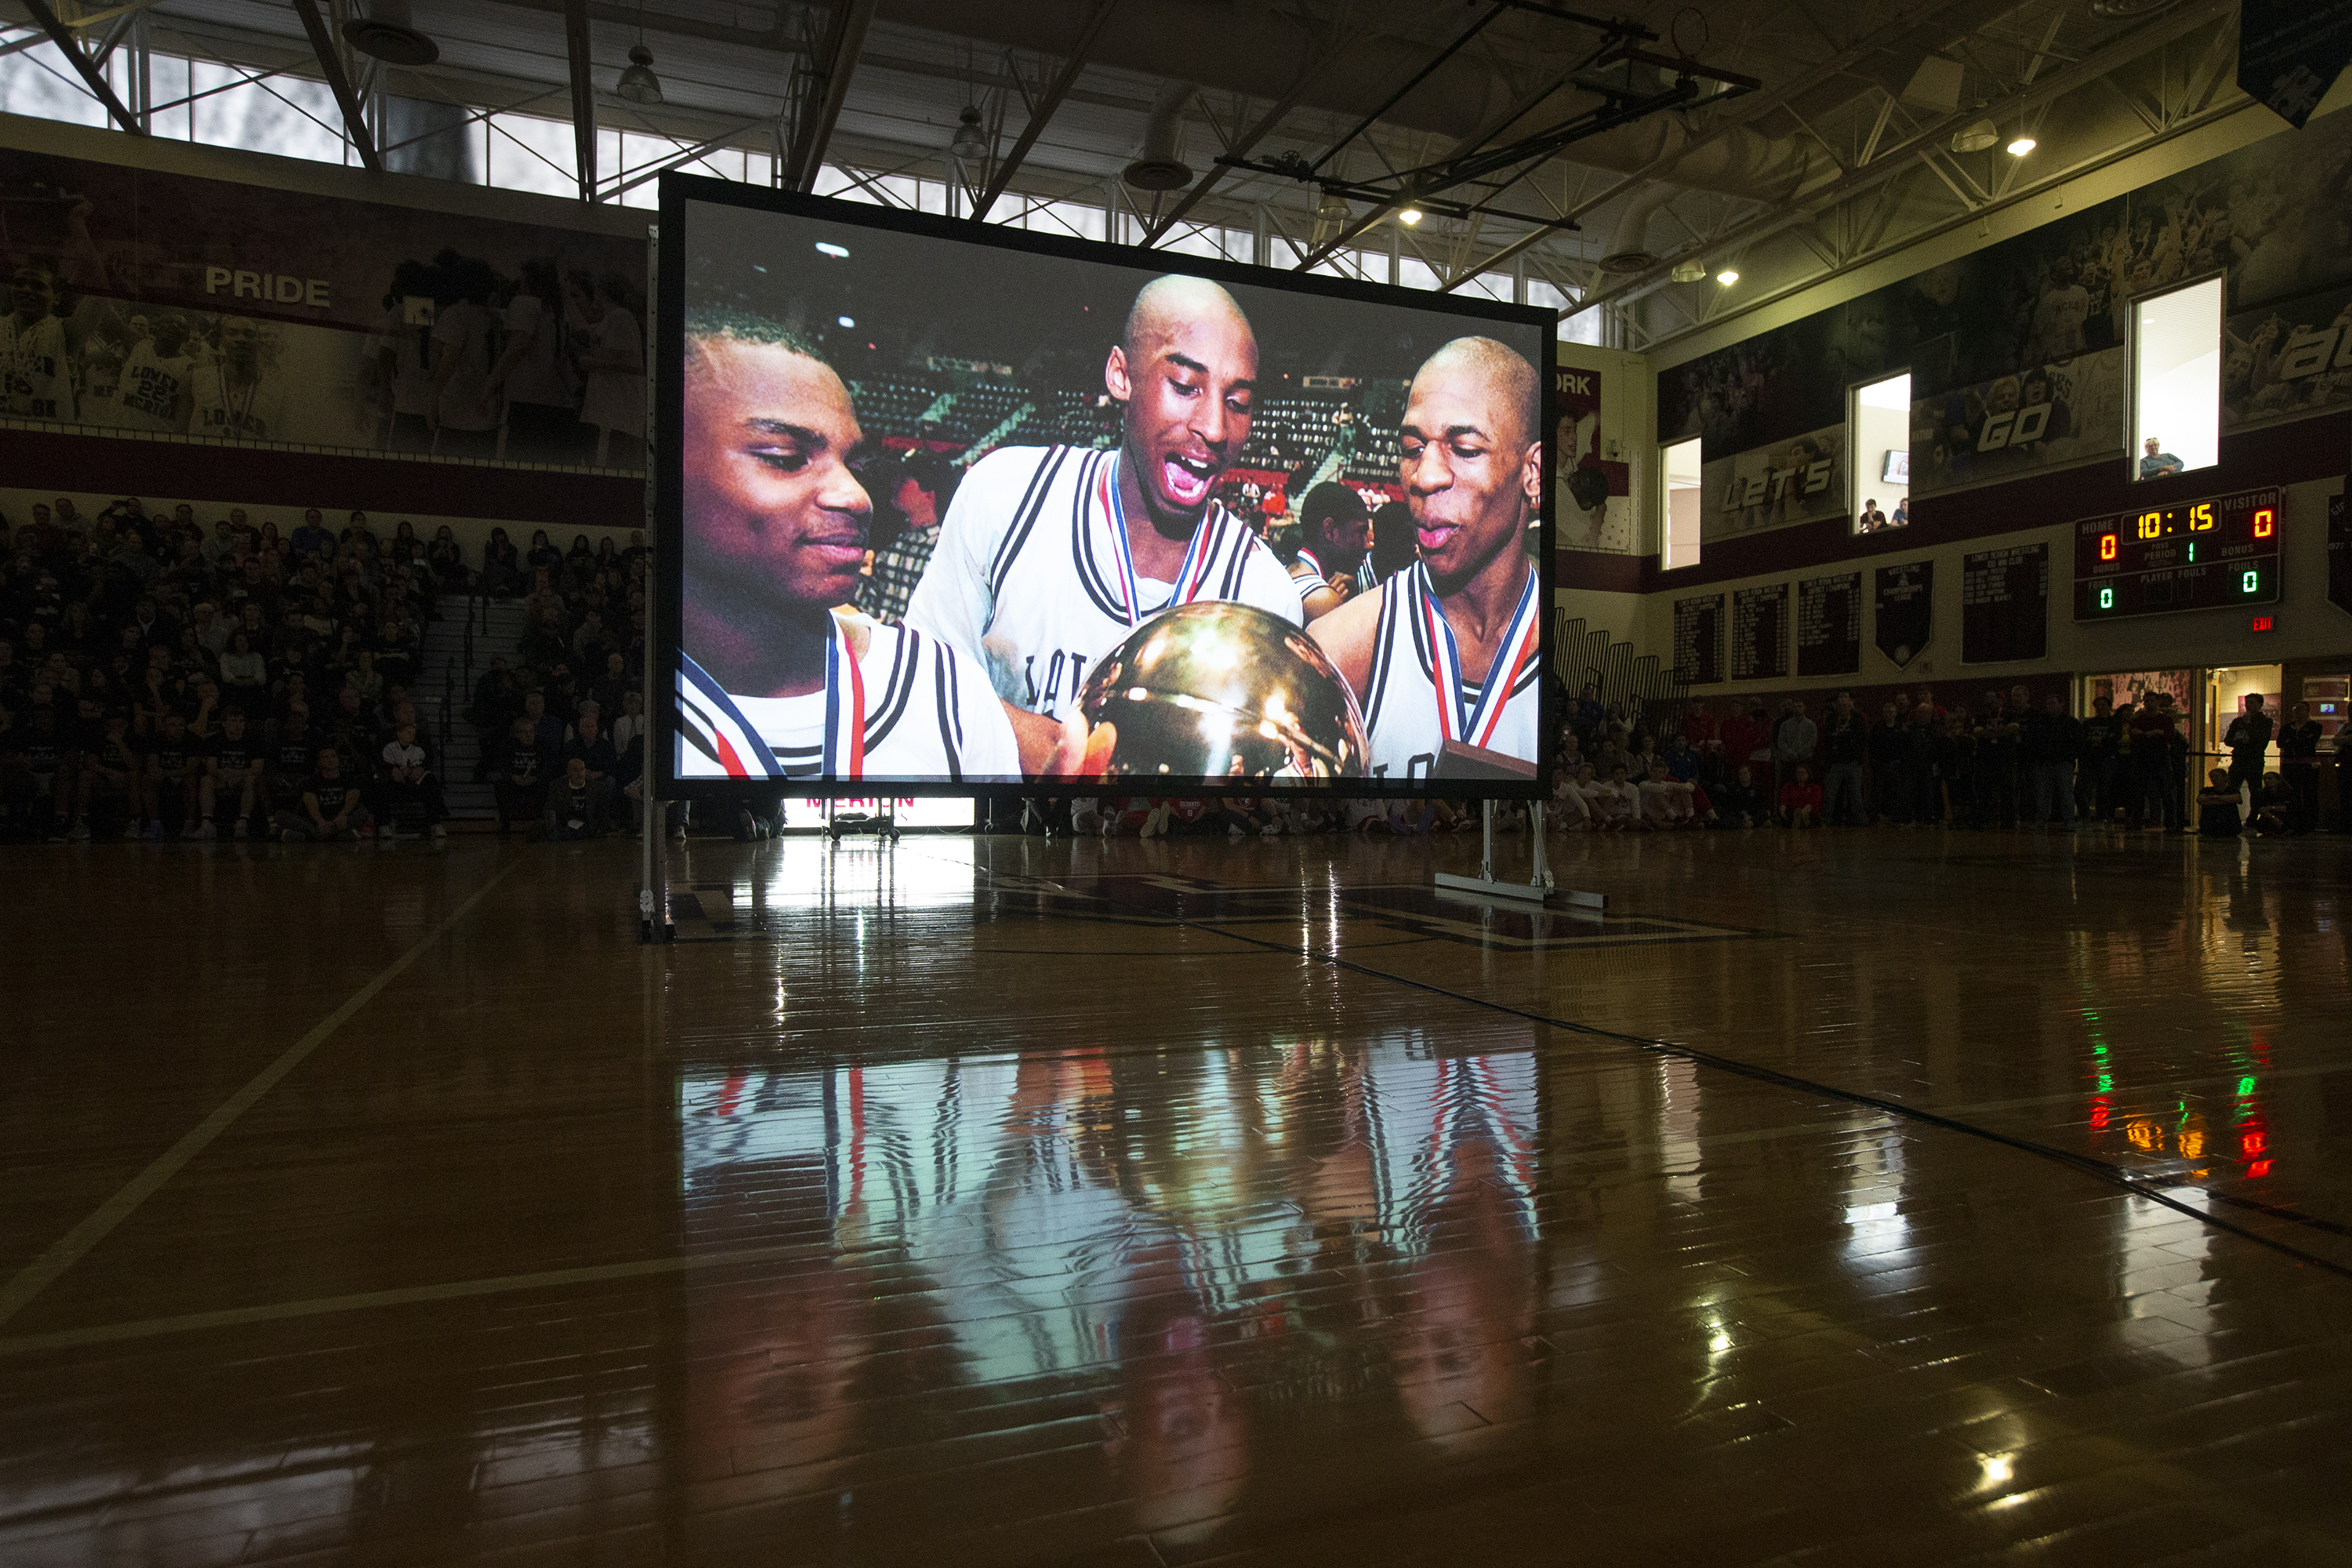 Kobe Bryant Memorial Continues to Grow at Lower Merion High School